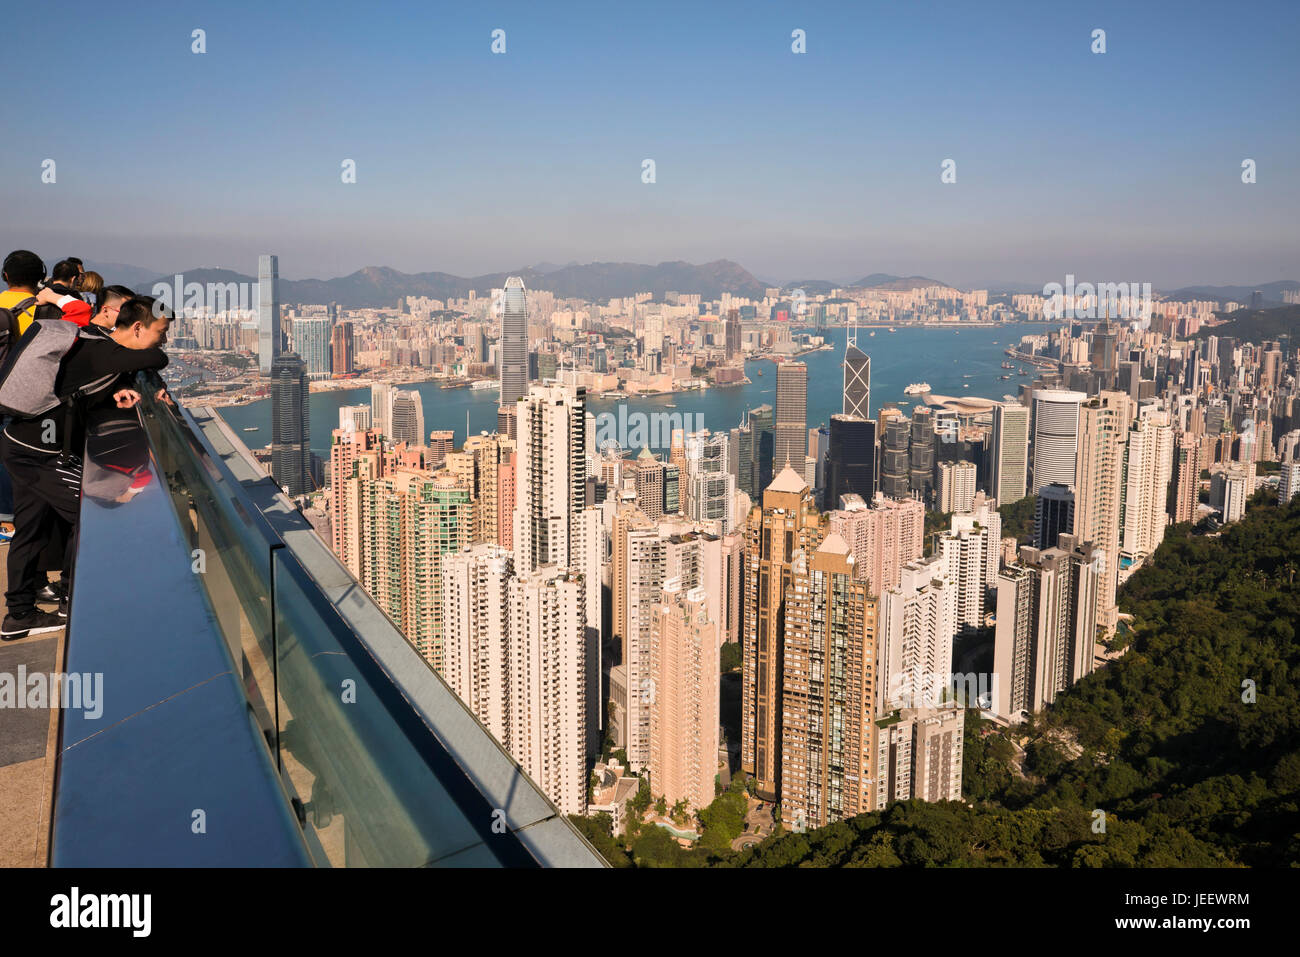 Horizontal view of people enjoying the view from up the Peak in Hong Kong, China. Stock Photo